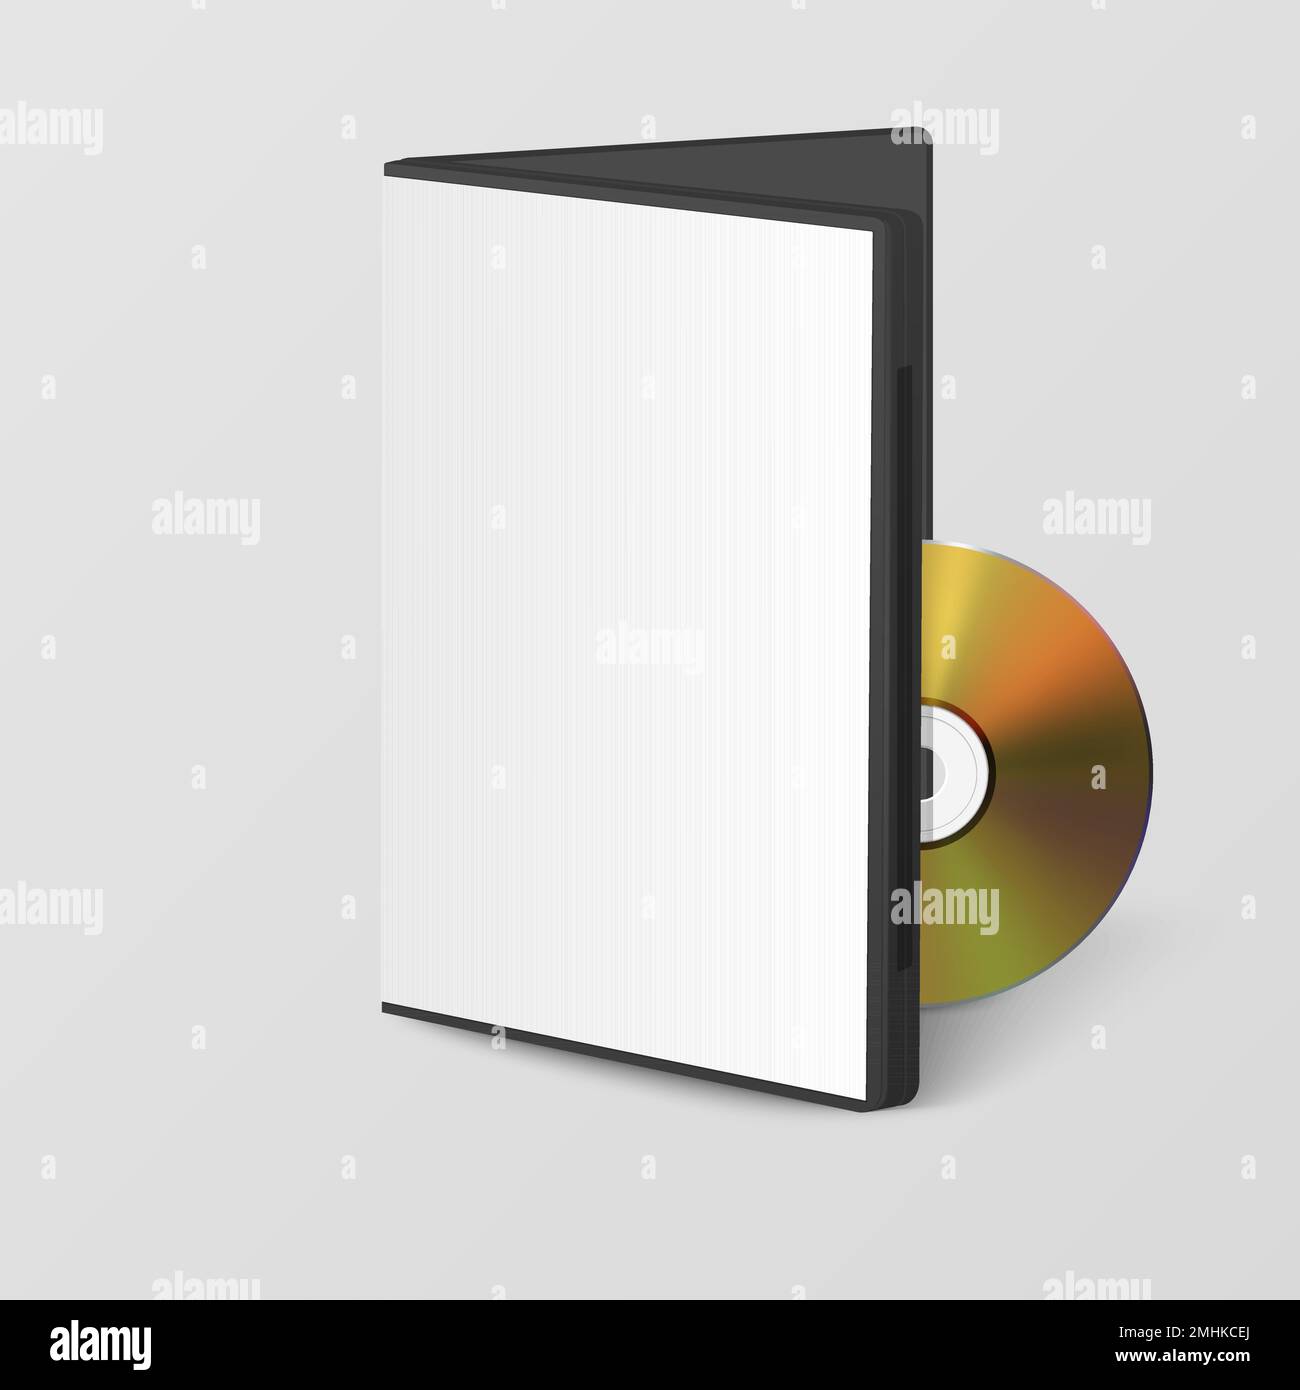 Vector Realistic Yellow CD, DVD with Plastic Rectangular Cover, Envelope, Case Closeup Isolated on White Background. CD Box, Packaging Design for Stock Vector